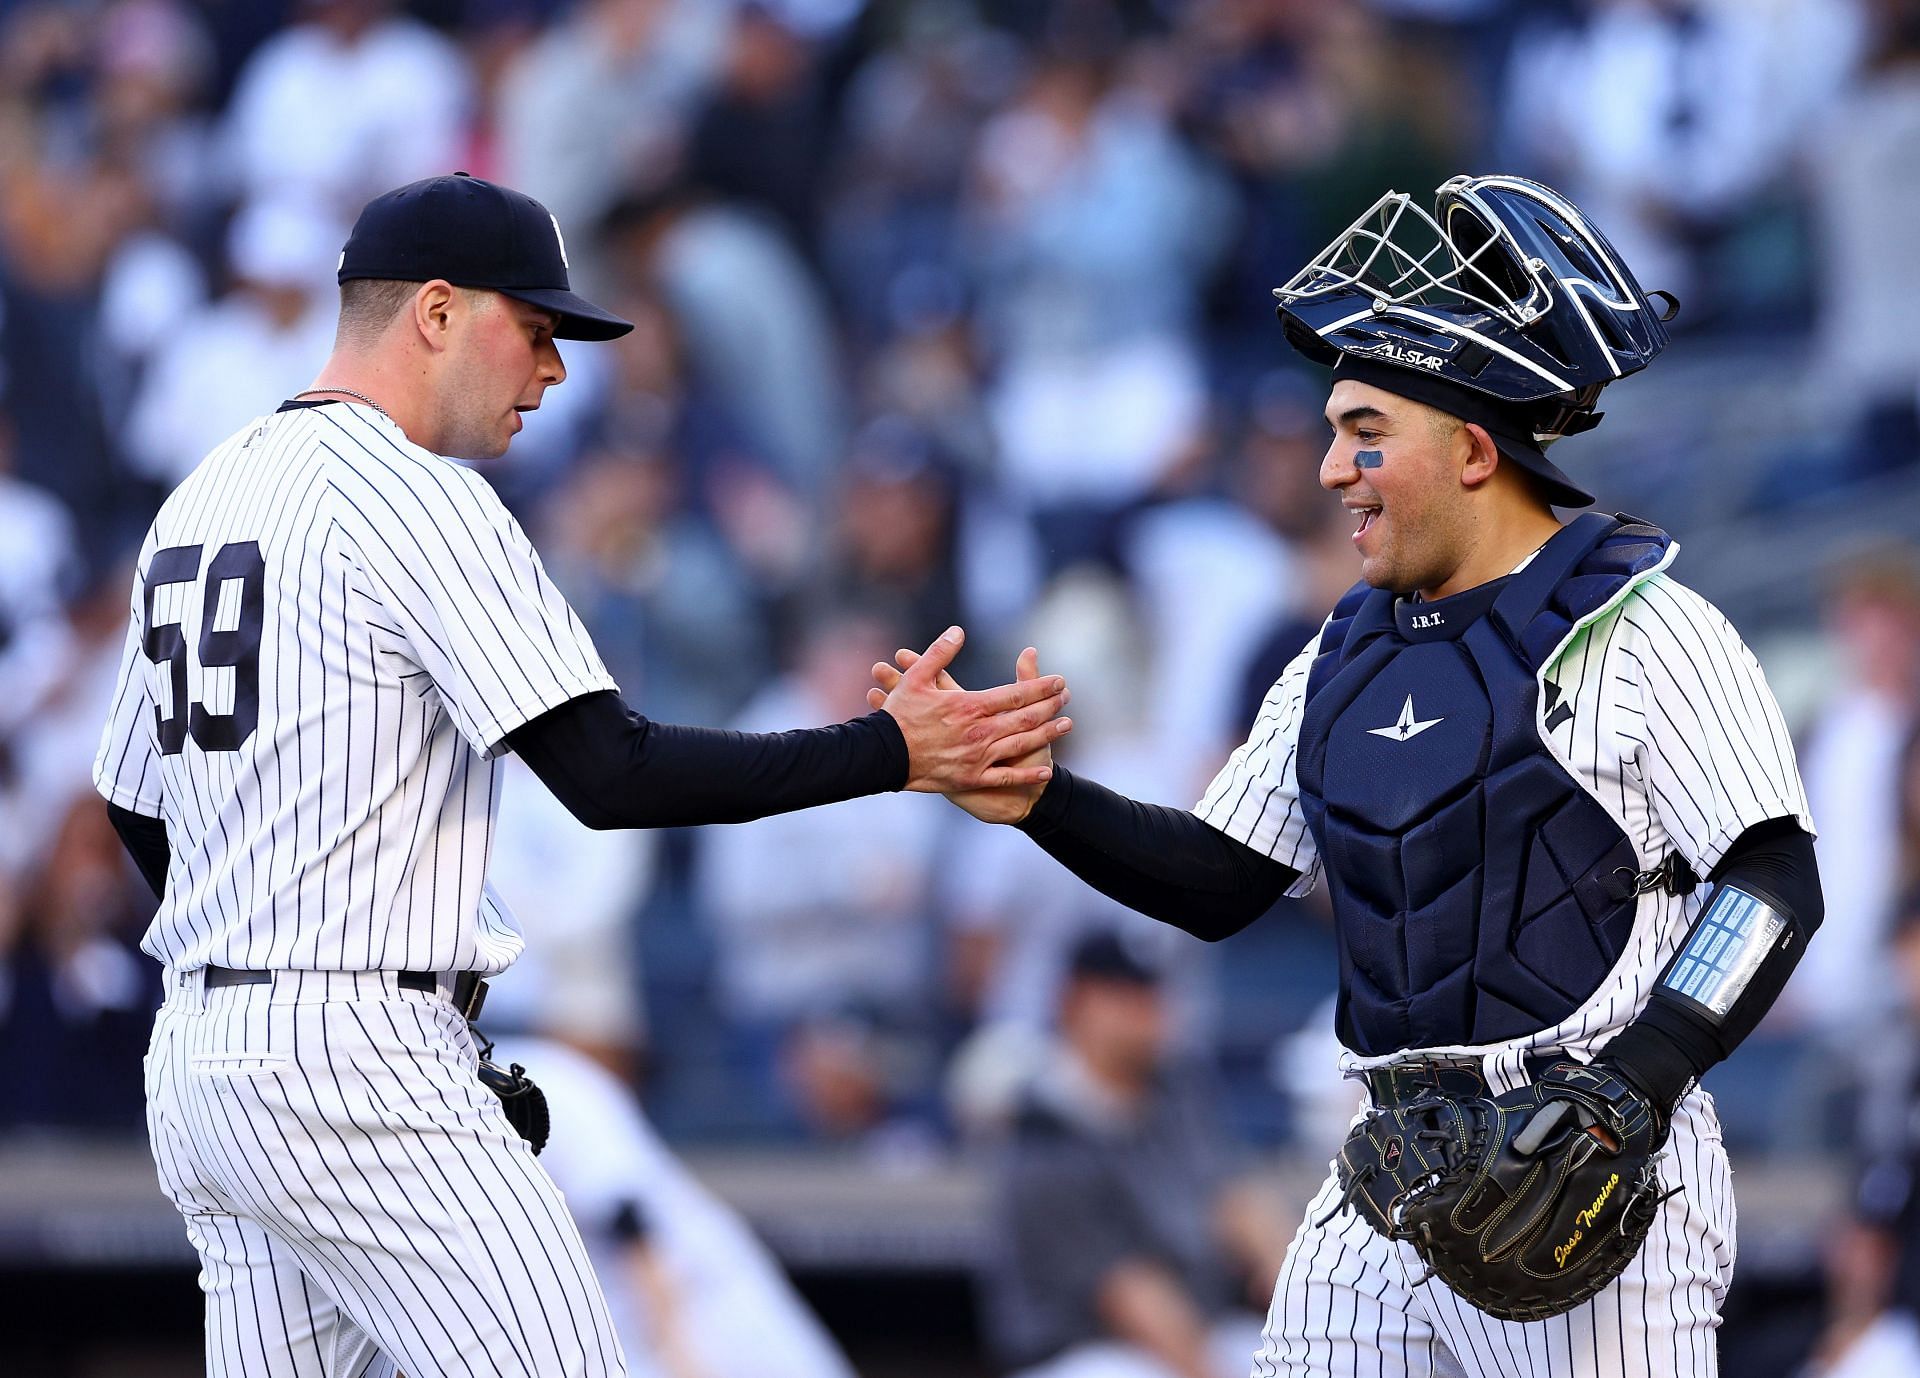 Newest Yankees catcher Jose Trevino is in search of a World Series